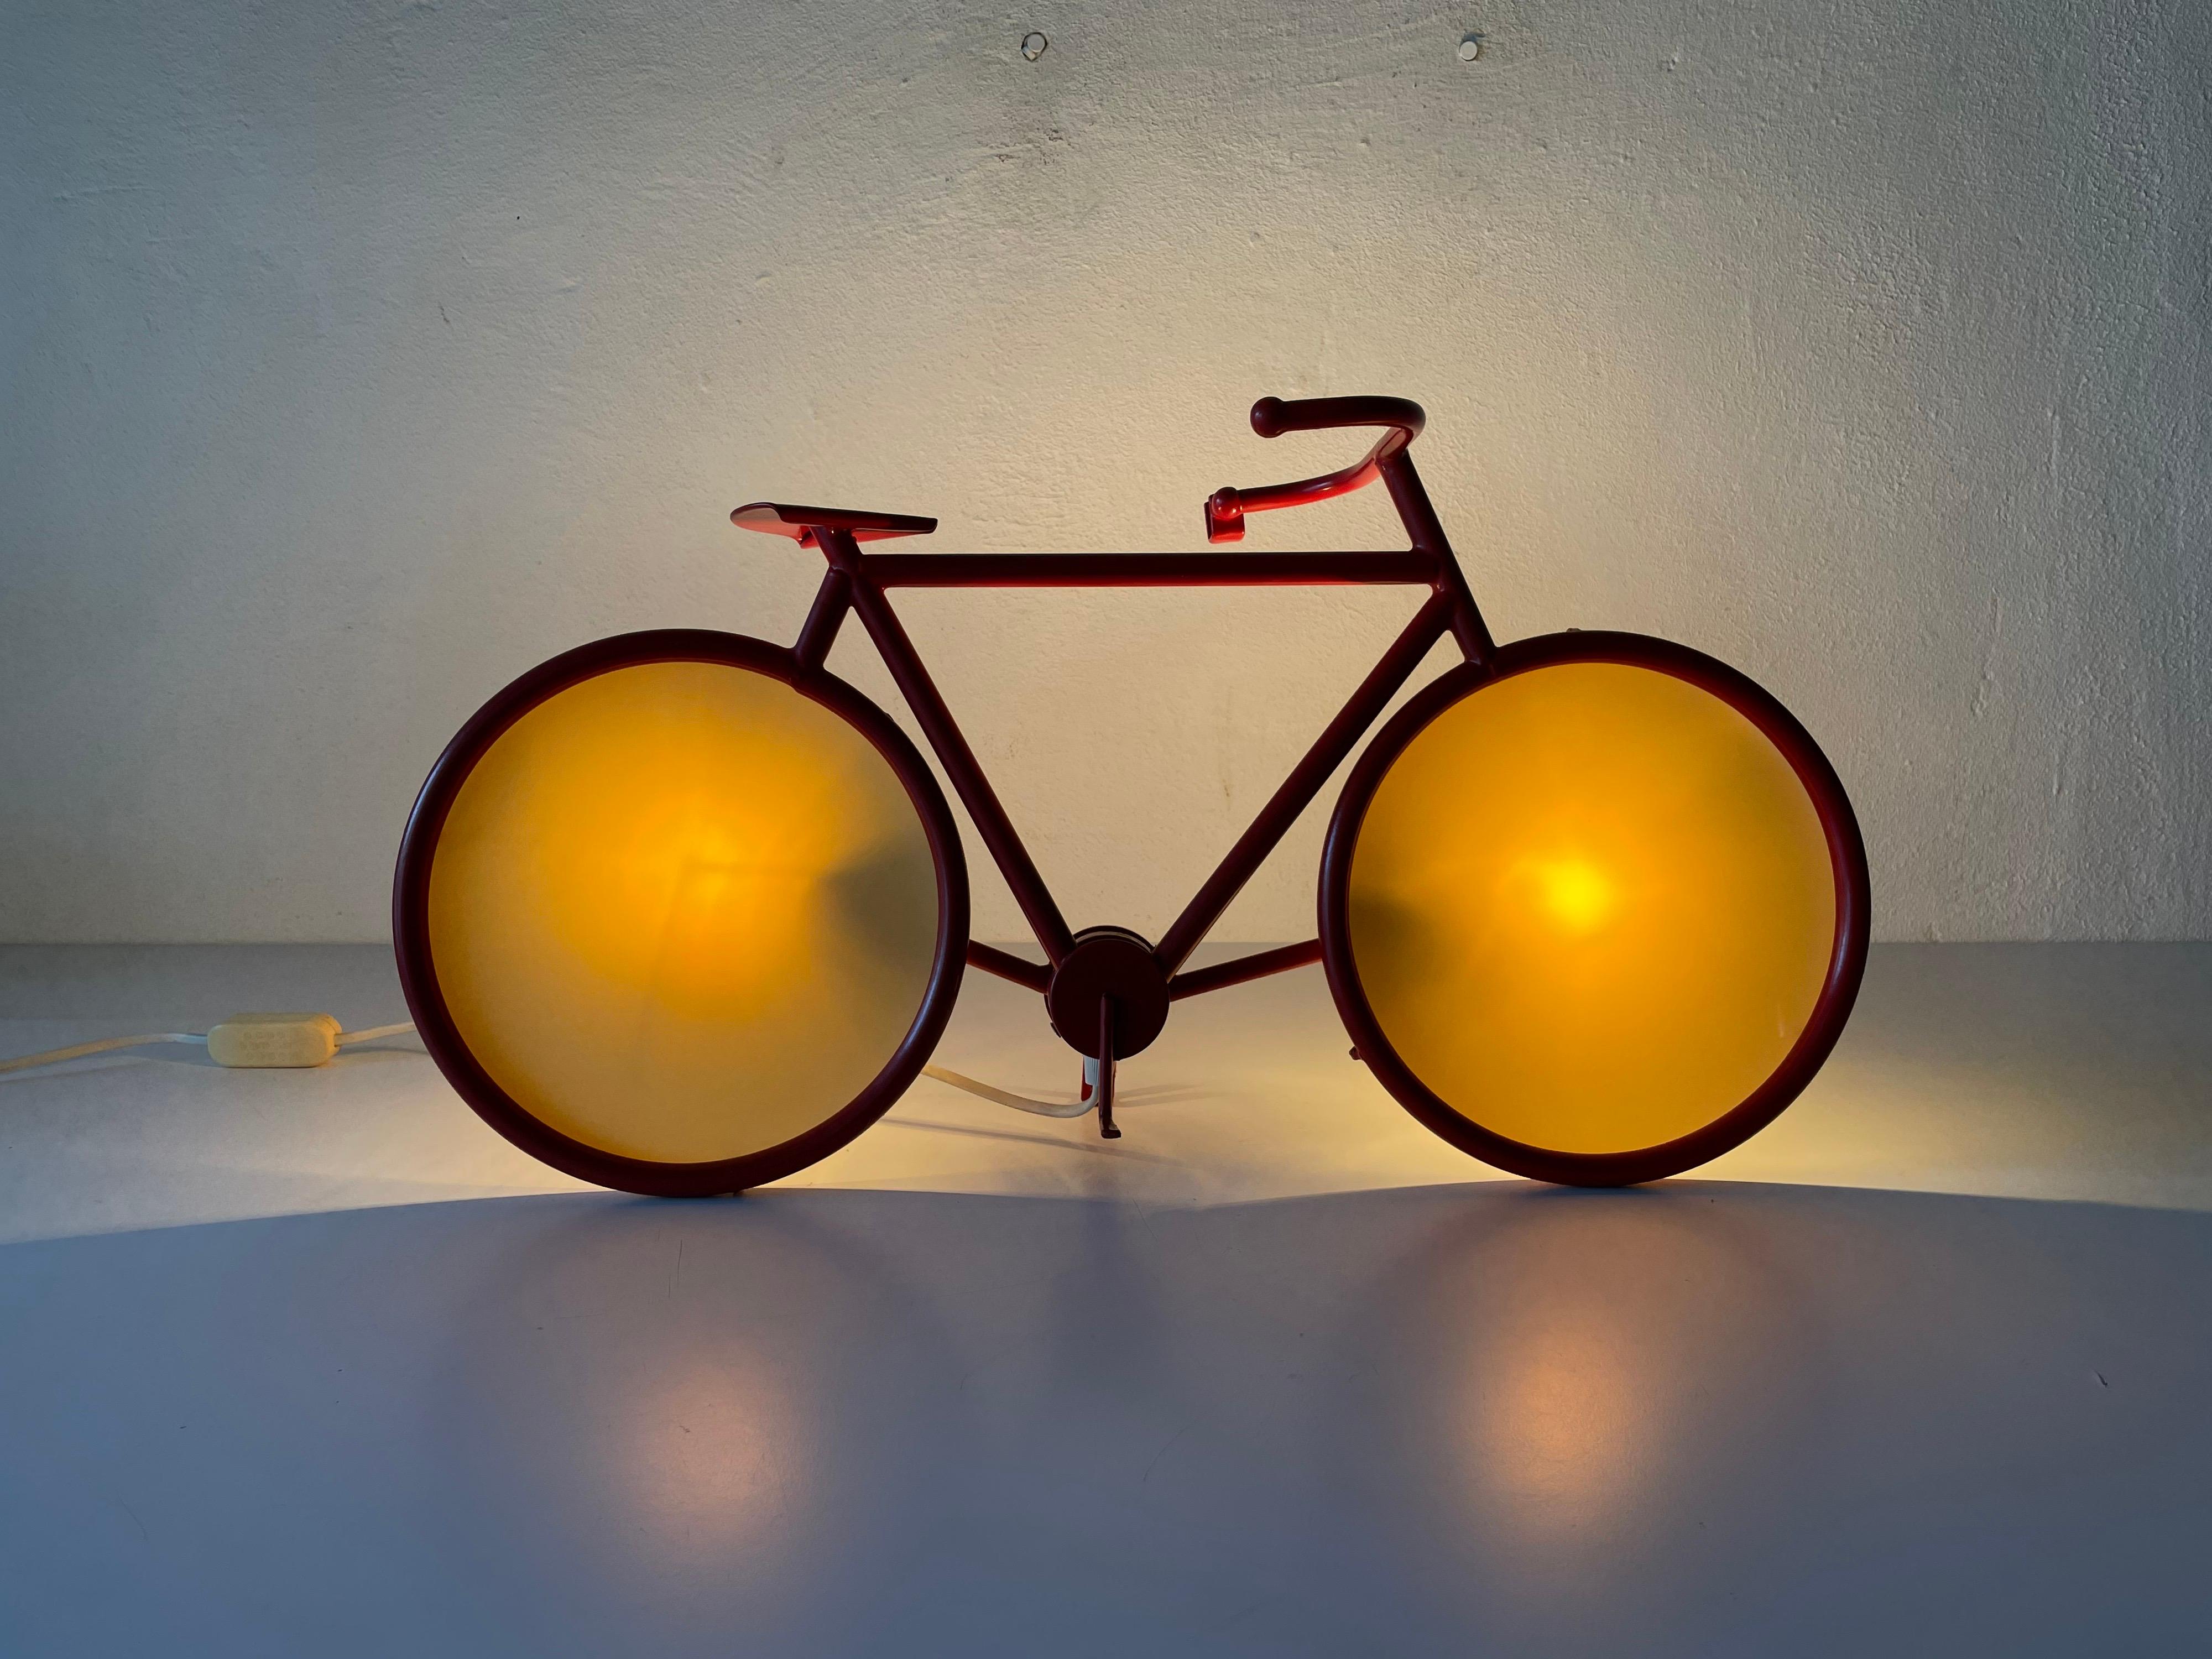 Red Metal Bicycle Table Lamp or Wall Lamp by Zicoli, 1970s, Italy For Sale 3